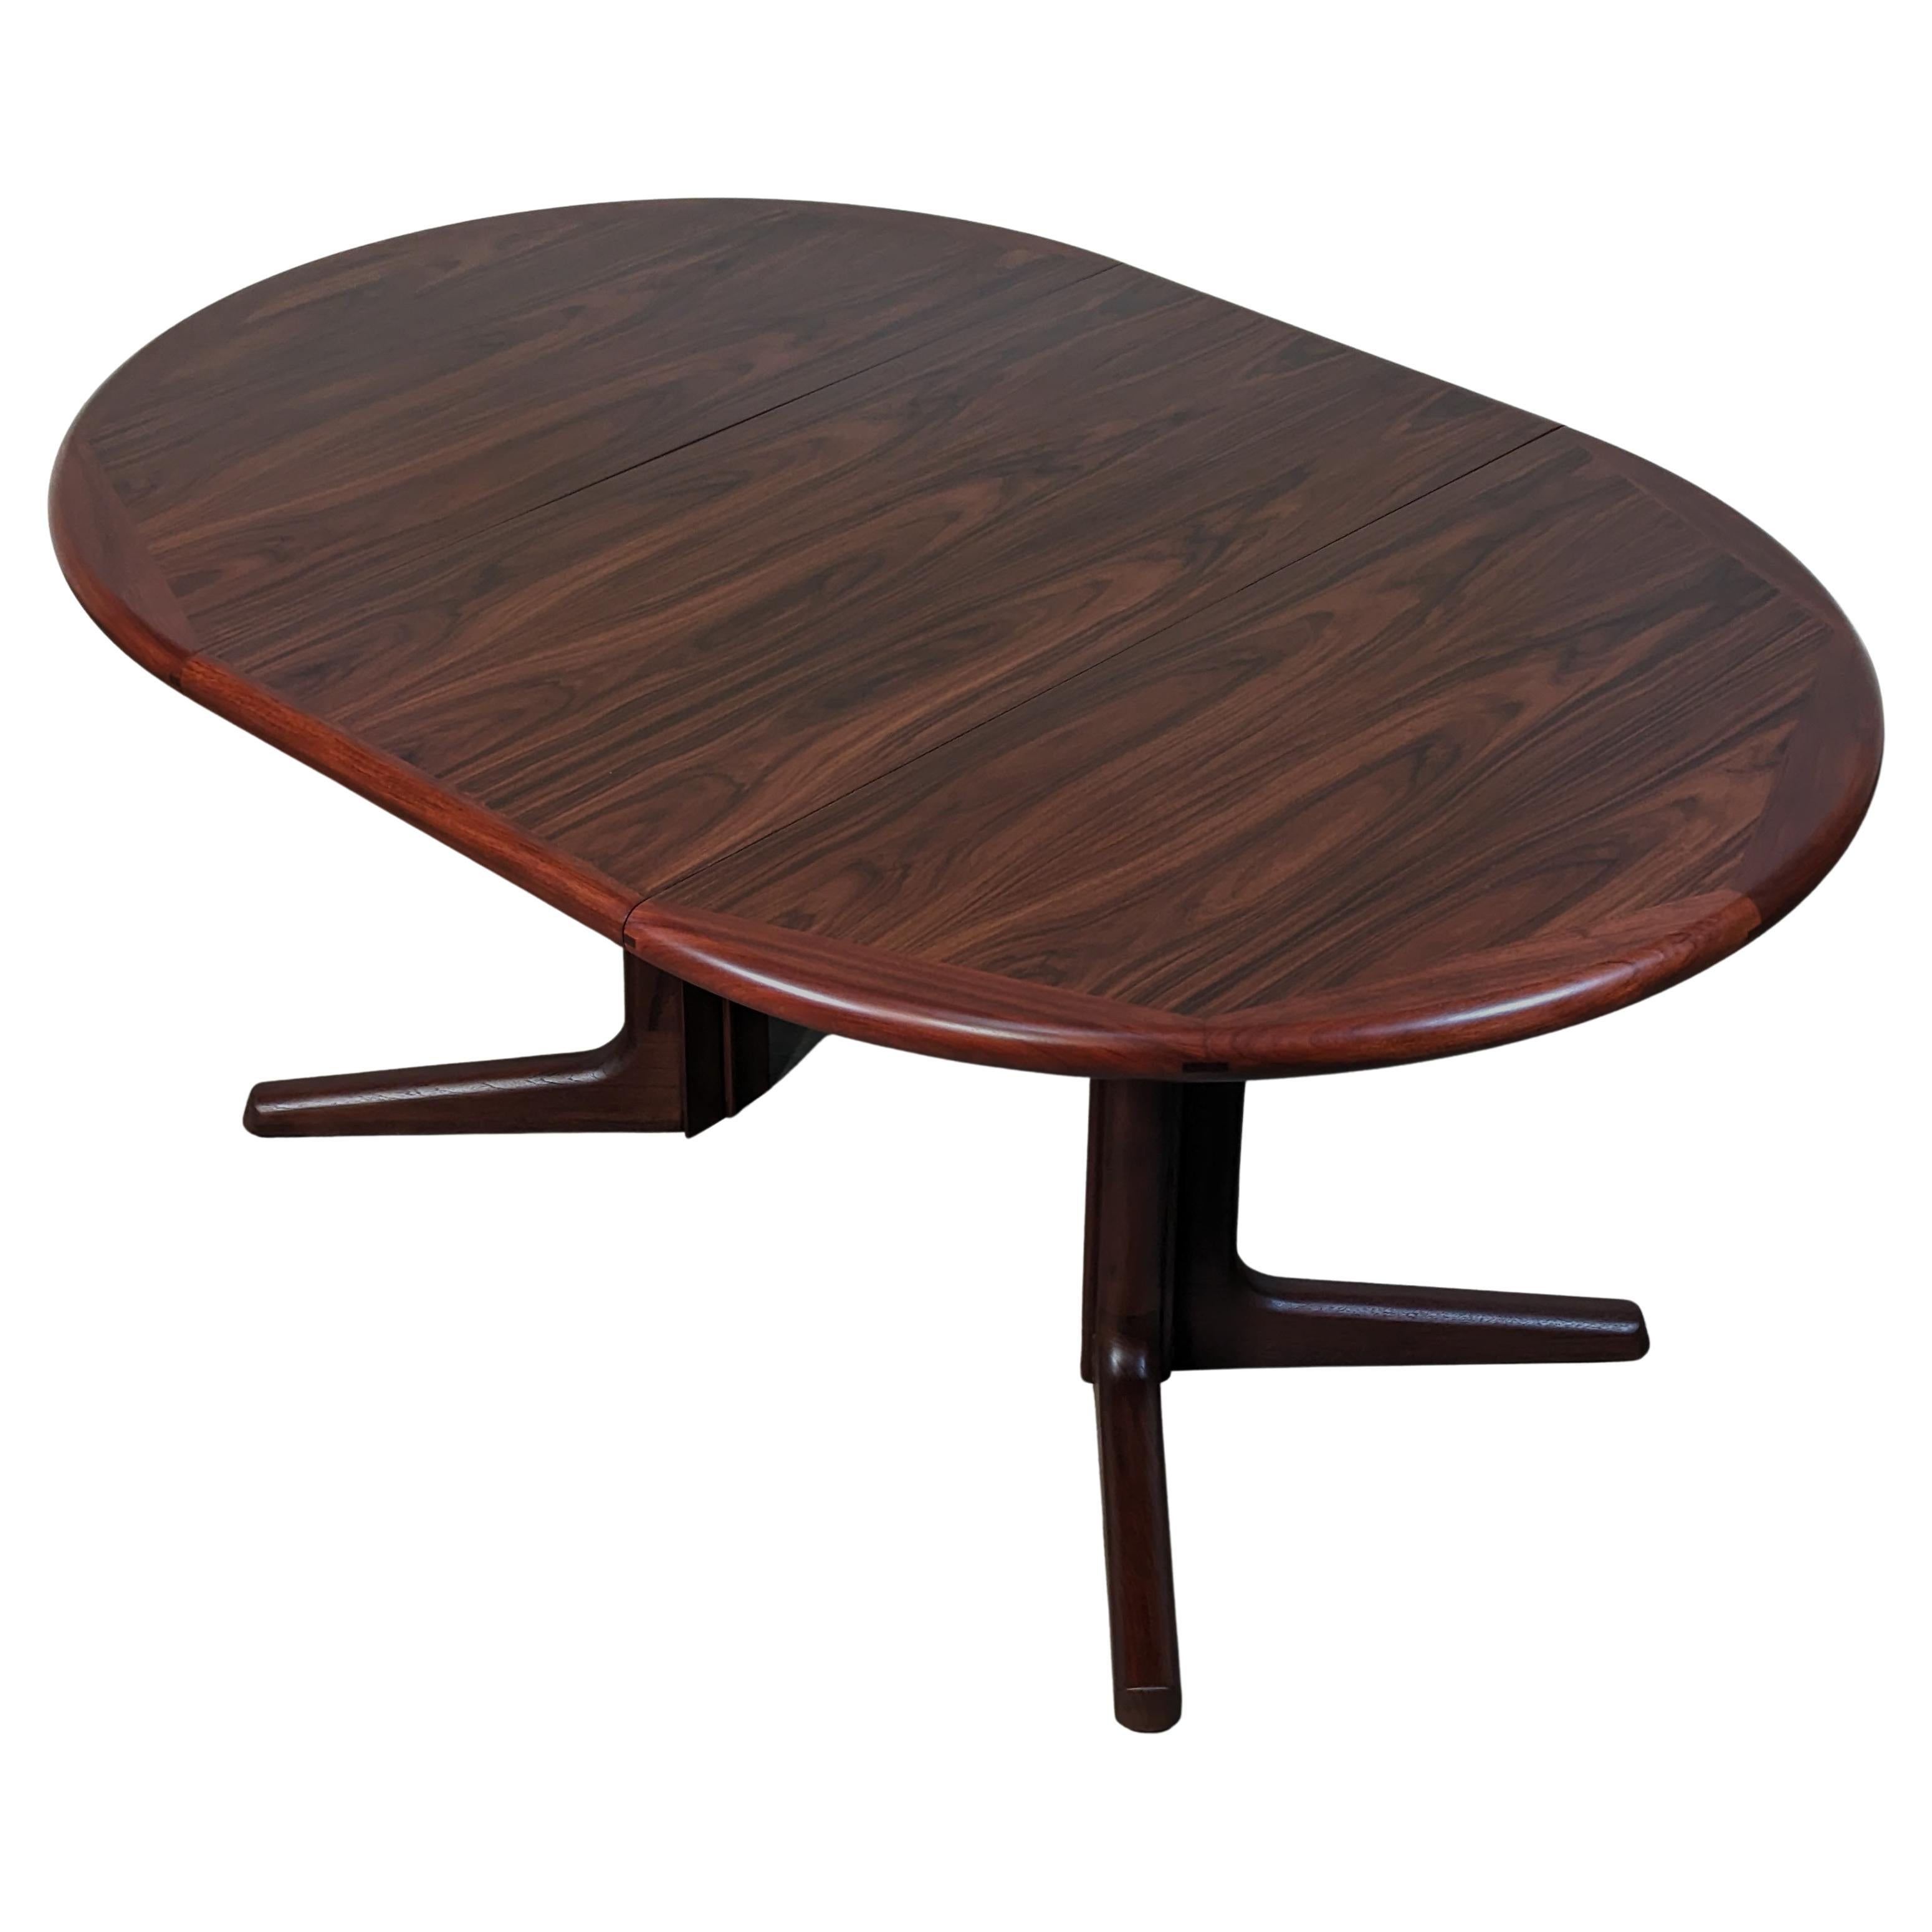 Mid Century Modern Rosewood Pedestal Dining Table by Dyrlund, c1960s